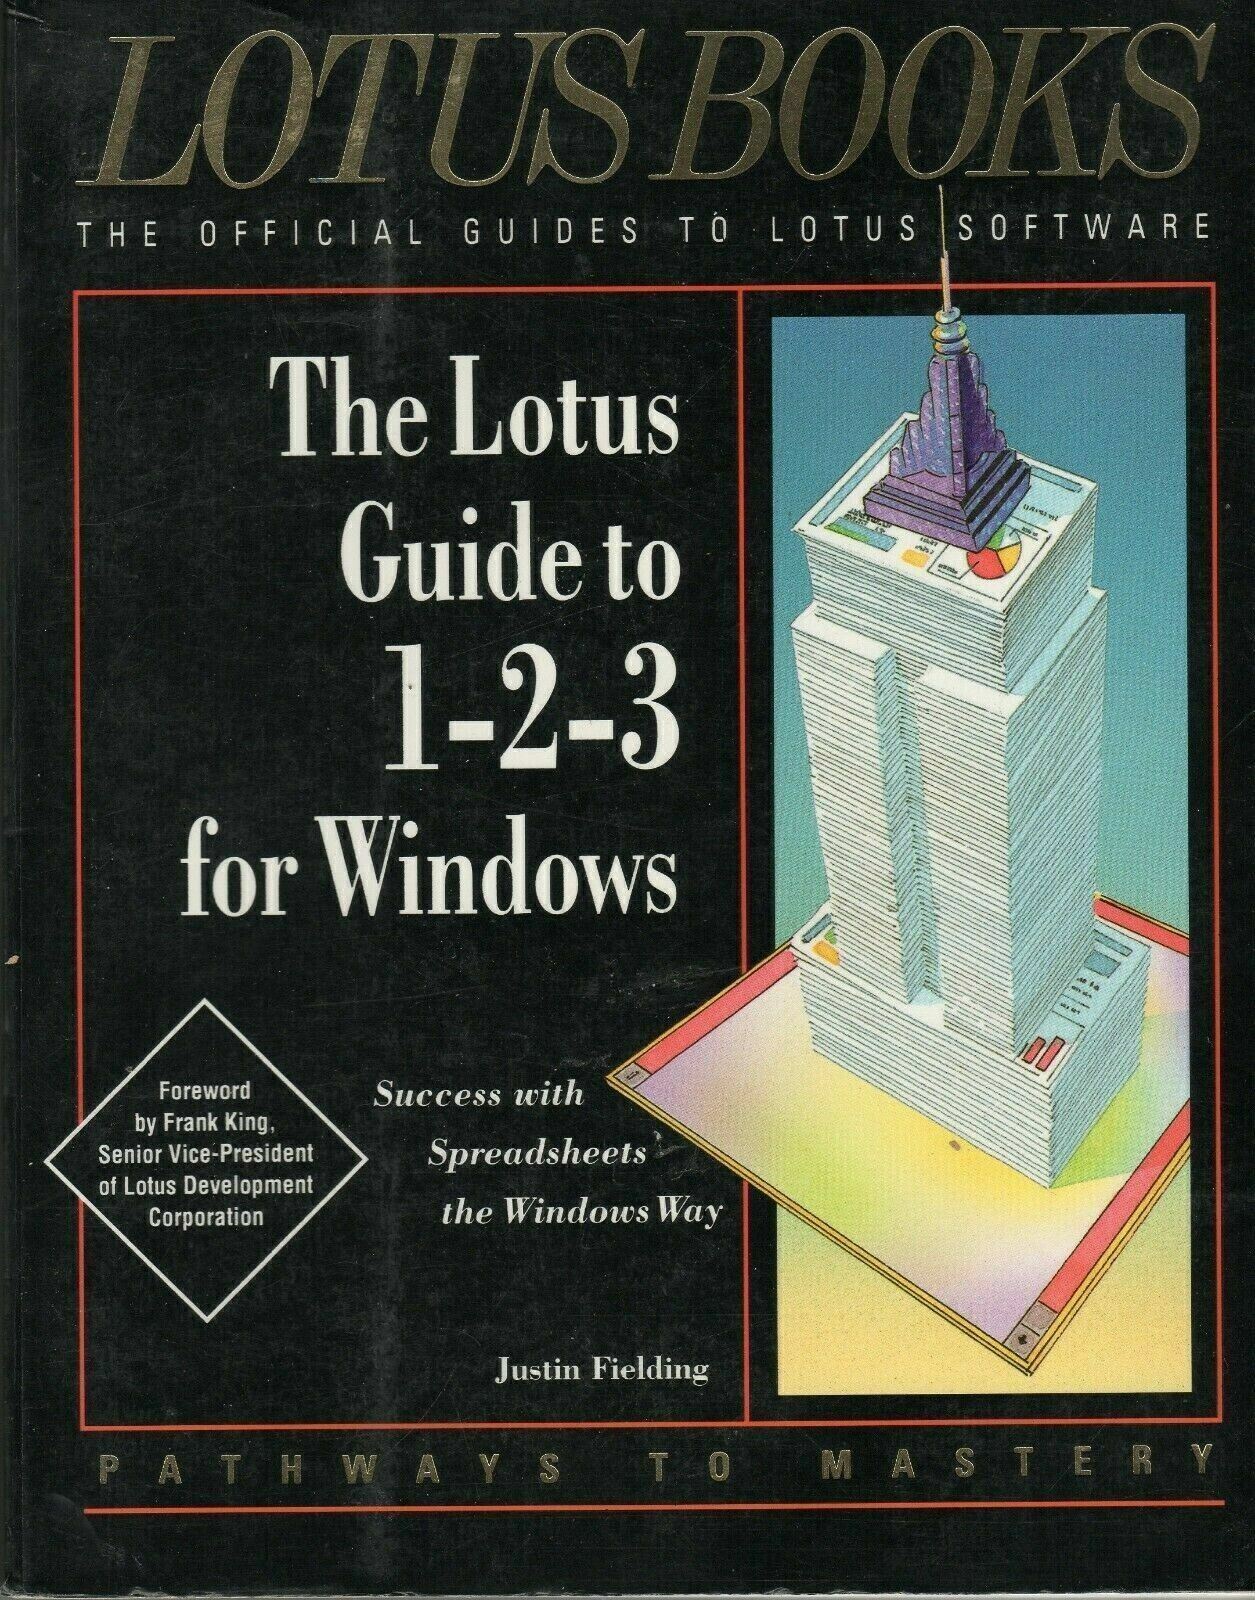 ITHistory (1991) BOOK: The Lotus Guide To 1-2-3 For Windows  (Fielding) IB5